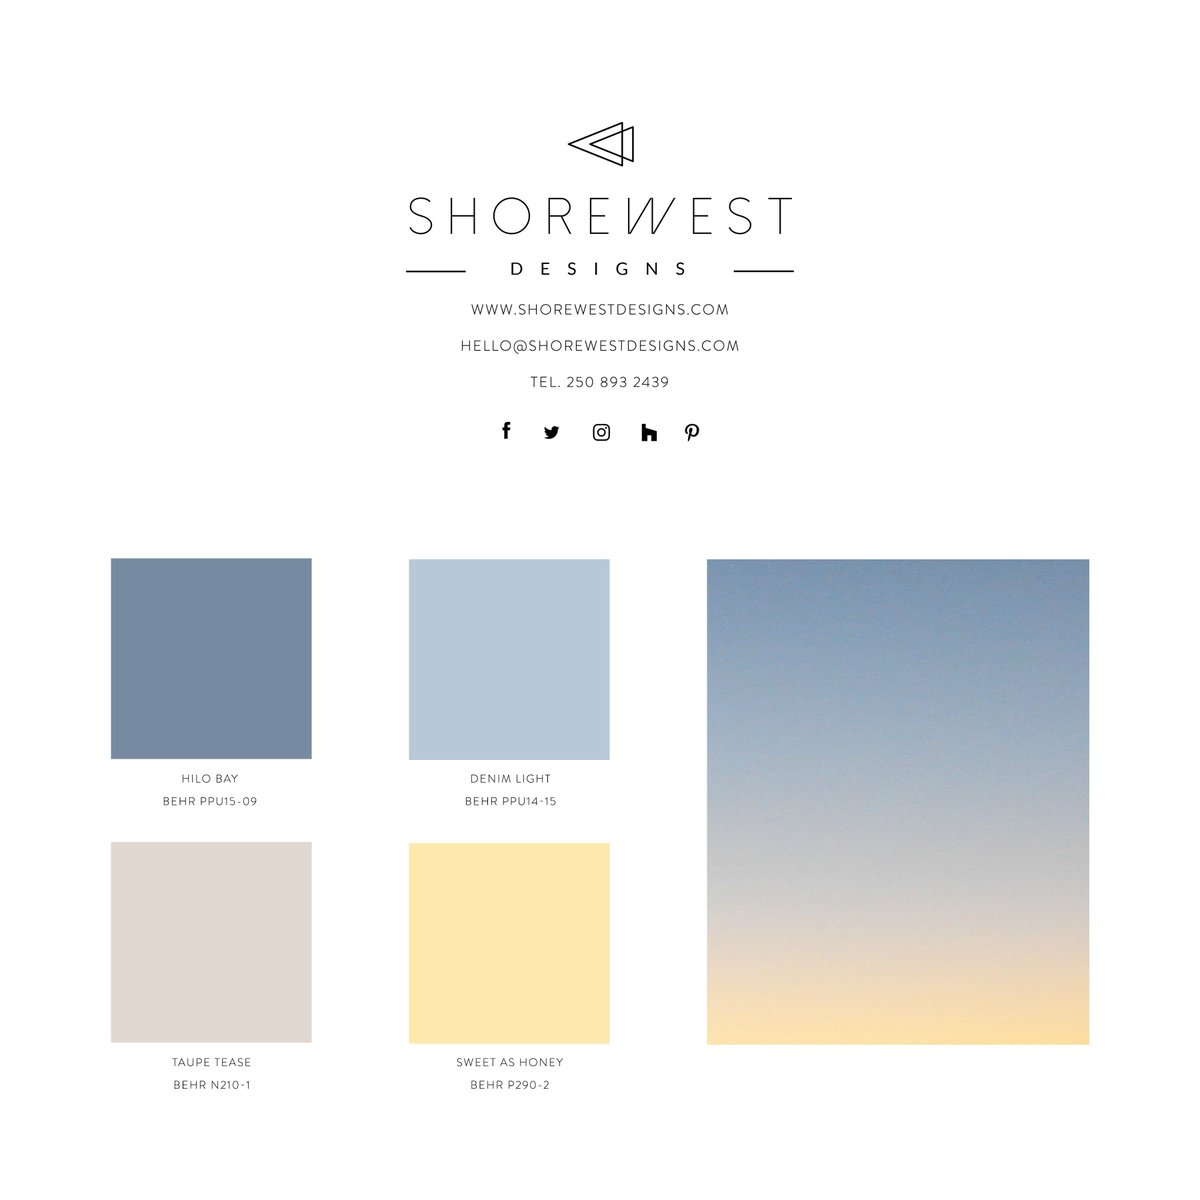 'DAYBREAK' || #SwatchSunday⠀
⠀
Featuring #Behr Paint:⠀
Hilo Bay | PPU15-09
Denim Light | PPU14-15
Taupe Tease | N210-1⠀
Sweet As Honey | P290-2
⠀
#paintswatch #design #colorplanning #colorpalette #designinspo #nature #moodboard #inspirationboard #interiordesign #sunrise